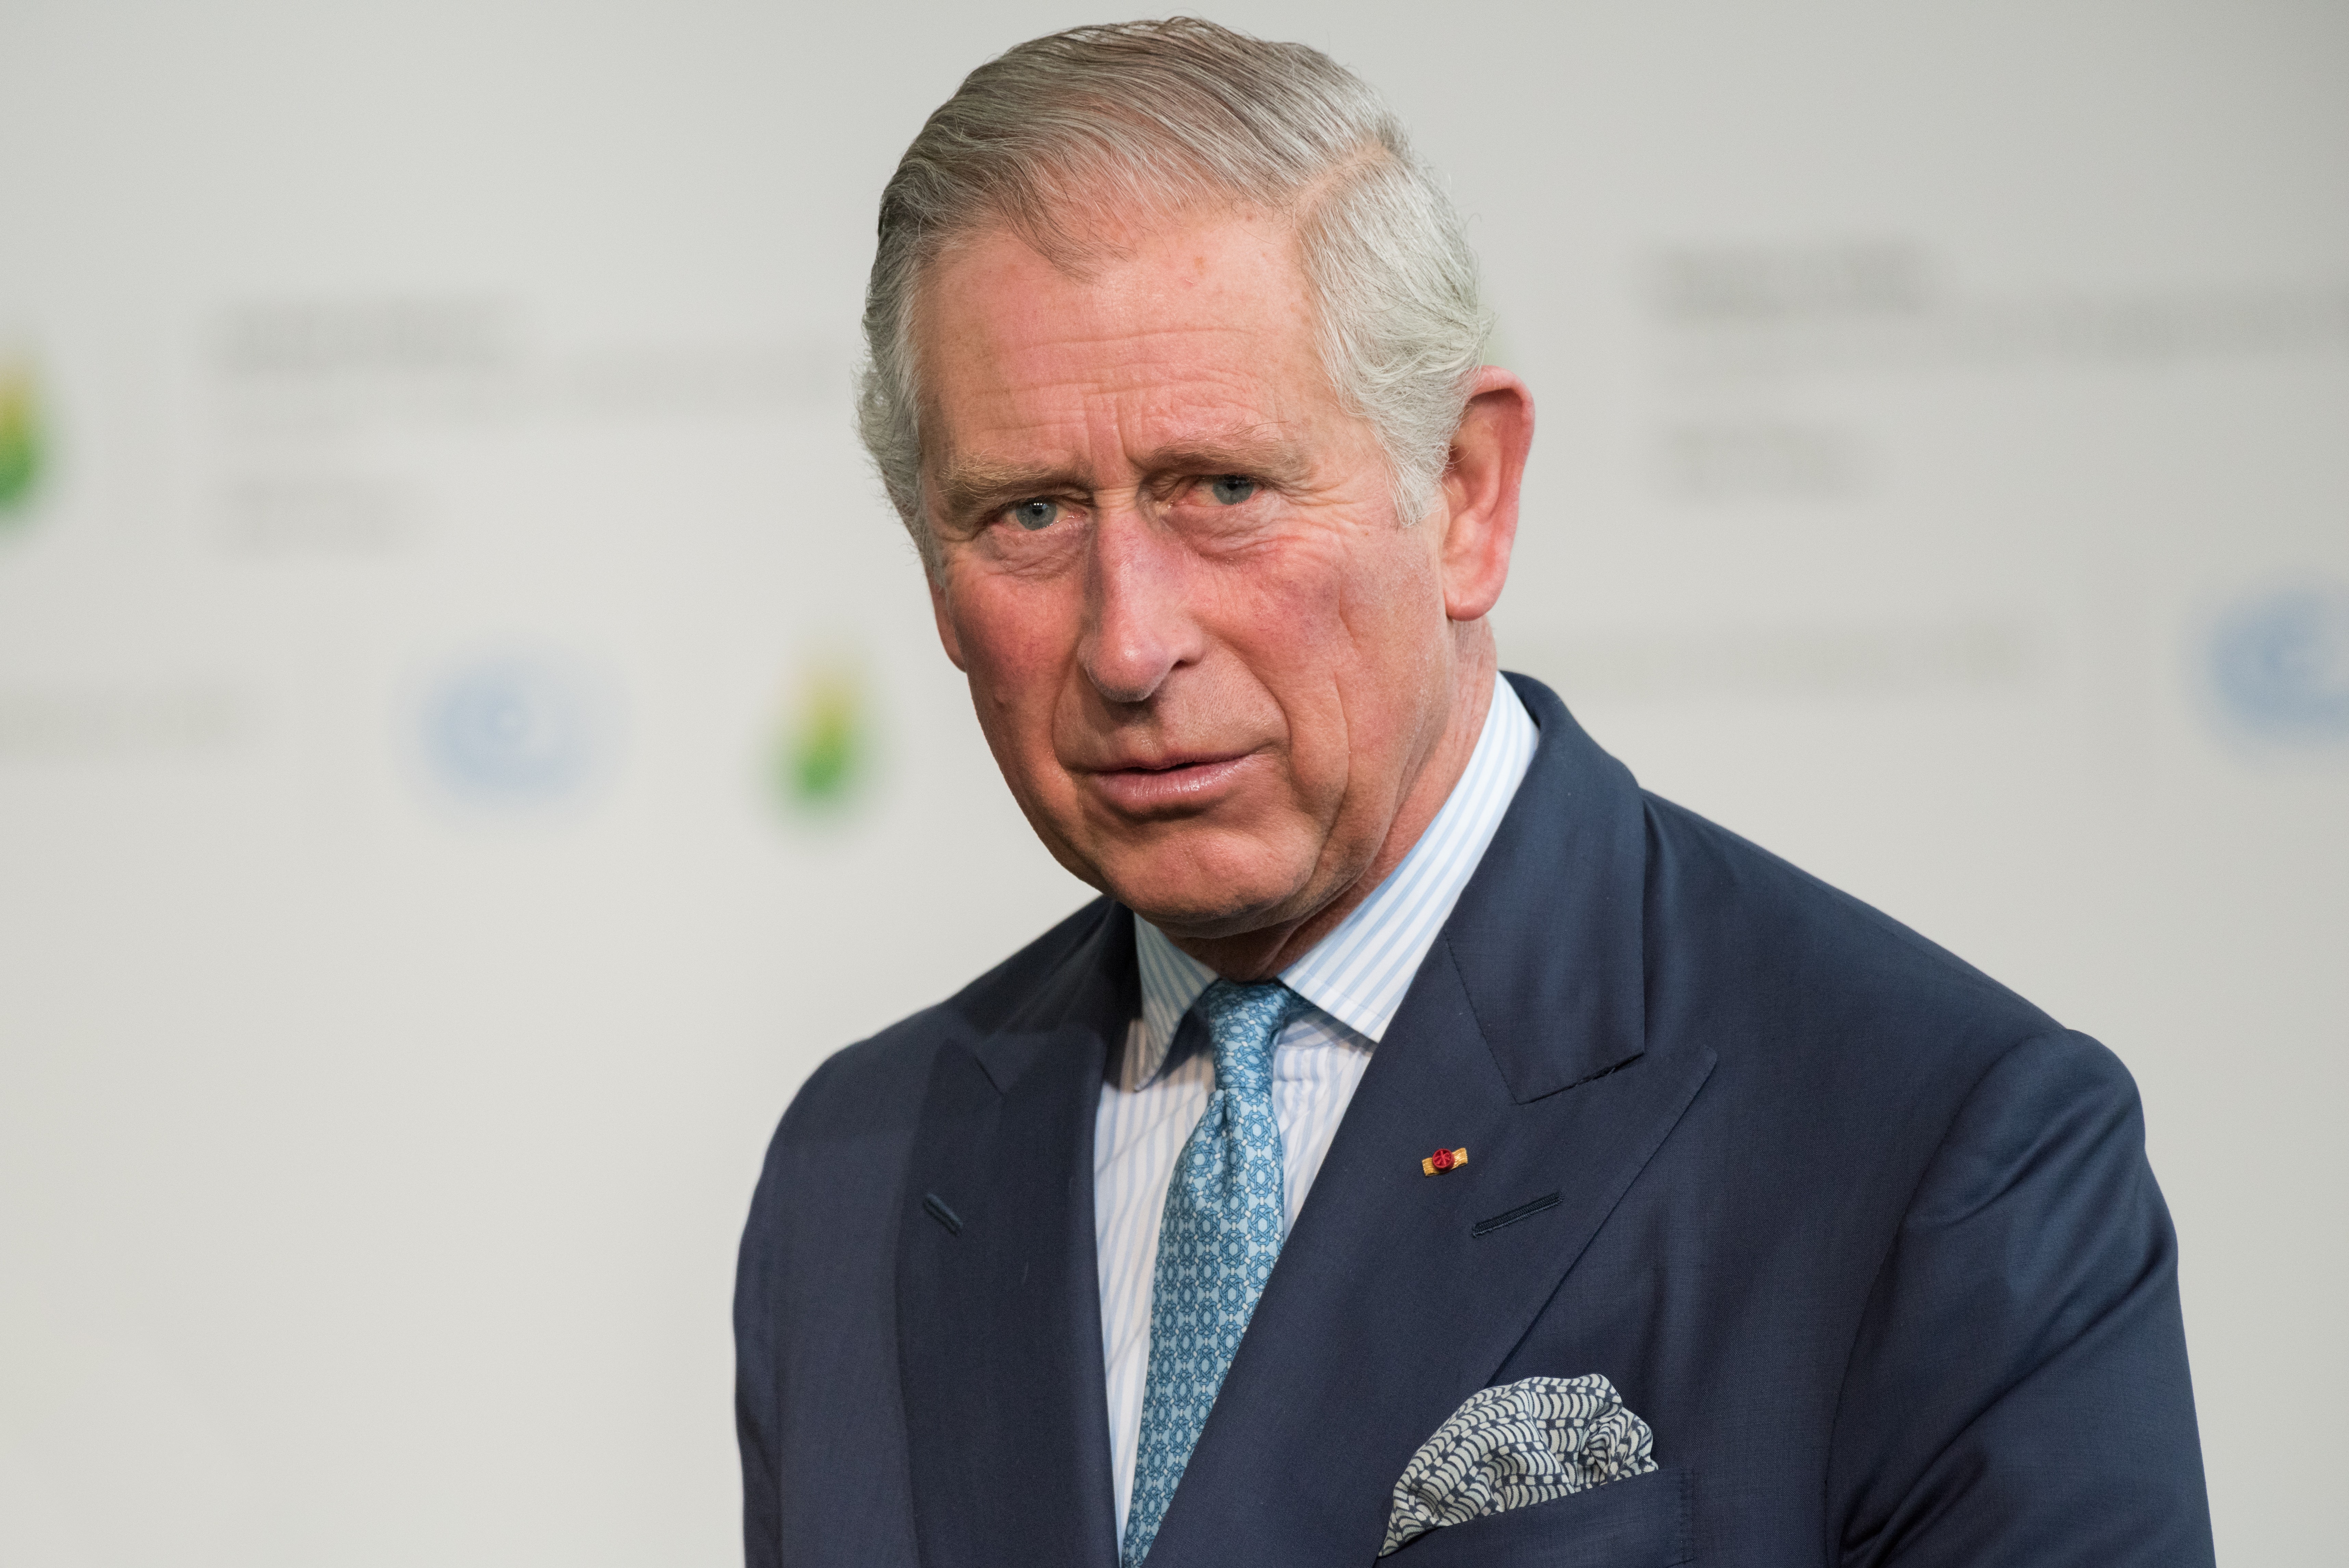 Prince Charles Accepted £1M Donation From Osama Bin Laden's Family Soon After His Death: Report